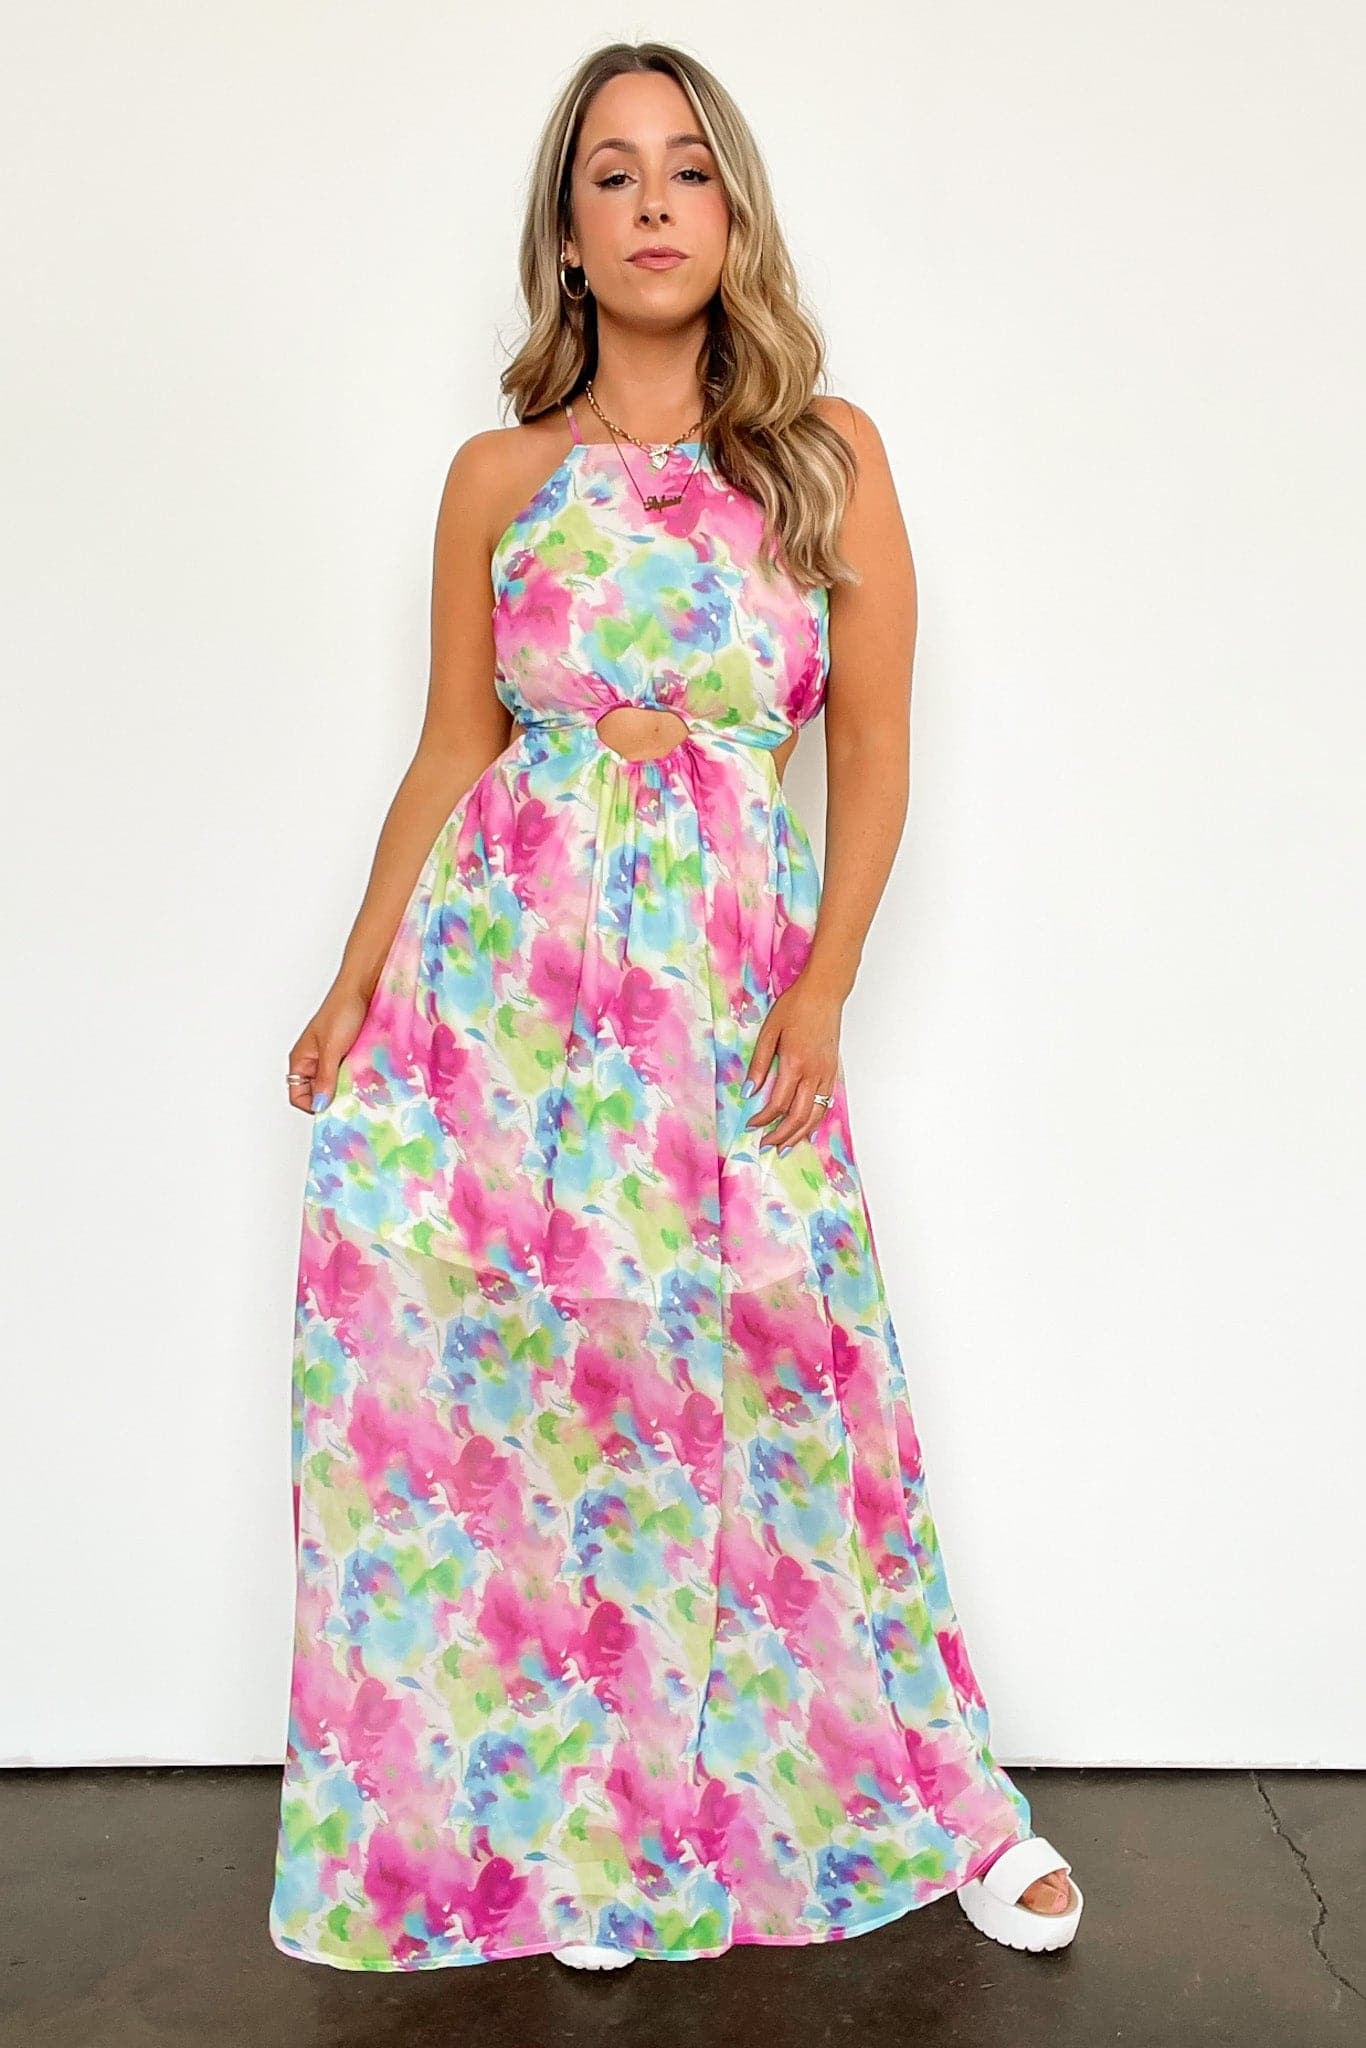  Looking so Flirty Floral Cutout Maxi Dress - FINAL SALE - Madison and Mallory